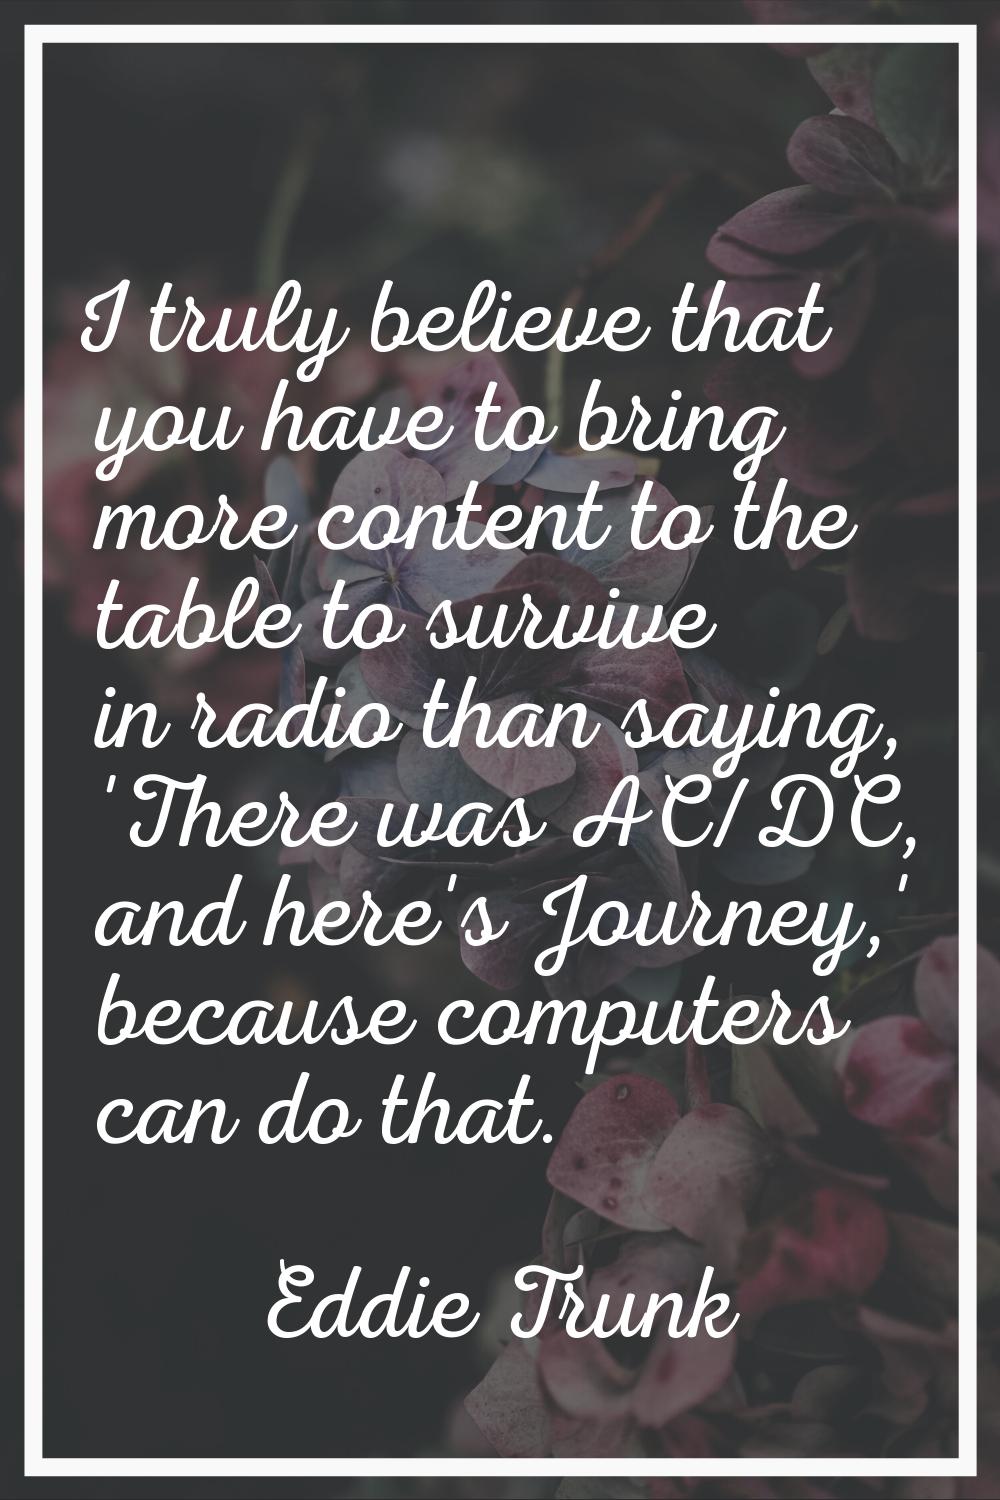 I truly believe that you have to bring more content to the table to survive in radio than saying, '